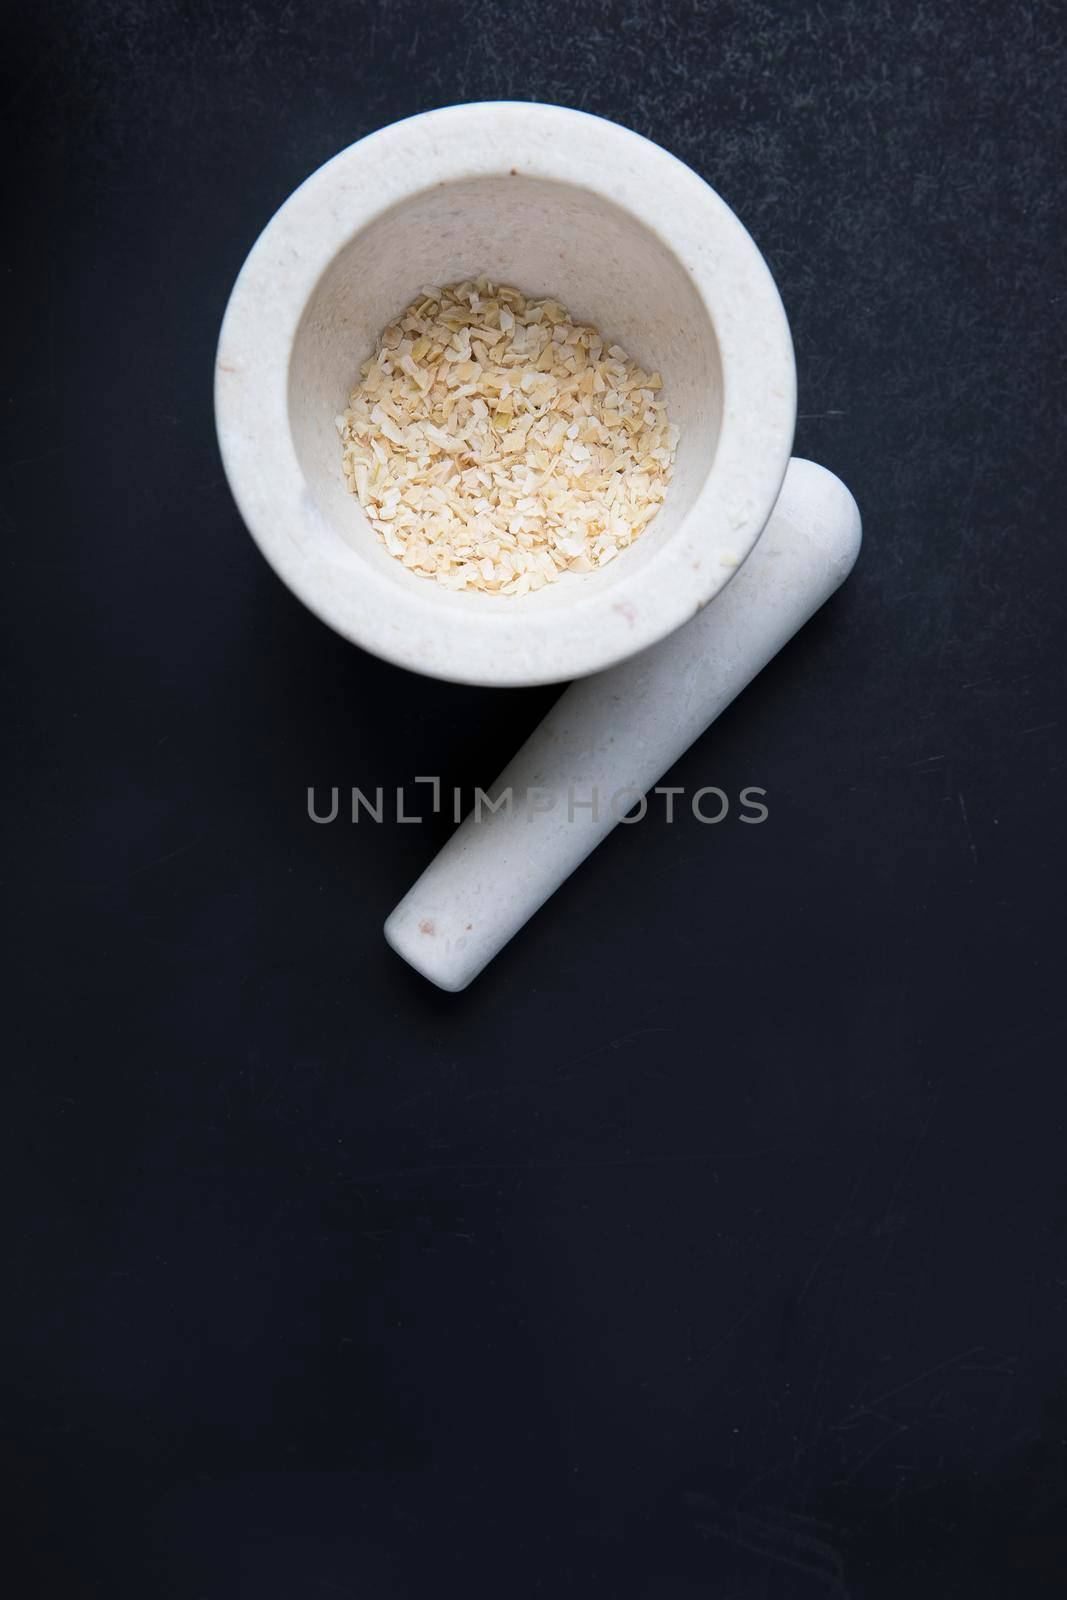 Porcelain Mortar and Pestle with Copy Space by charlotteLake